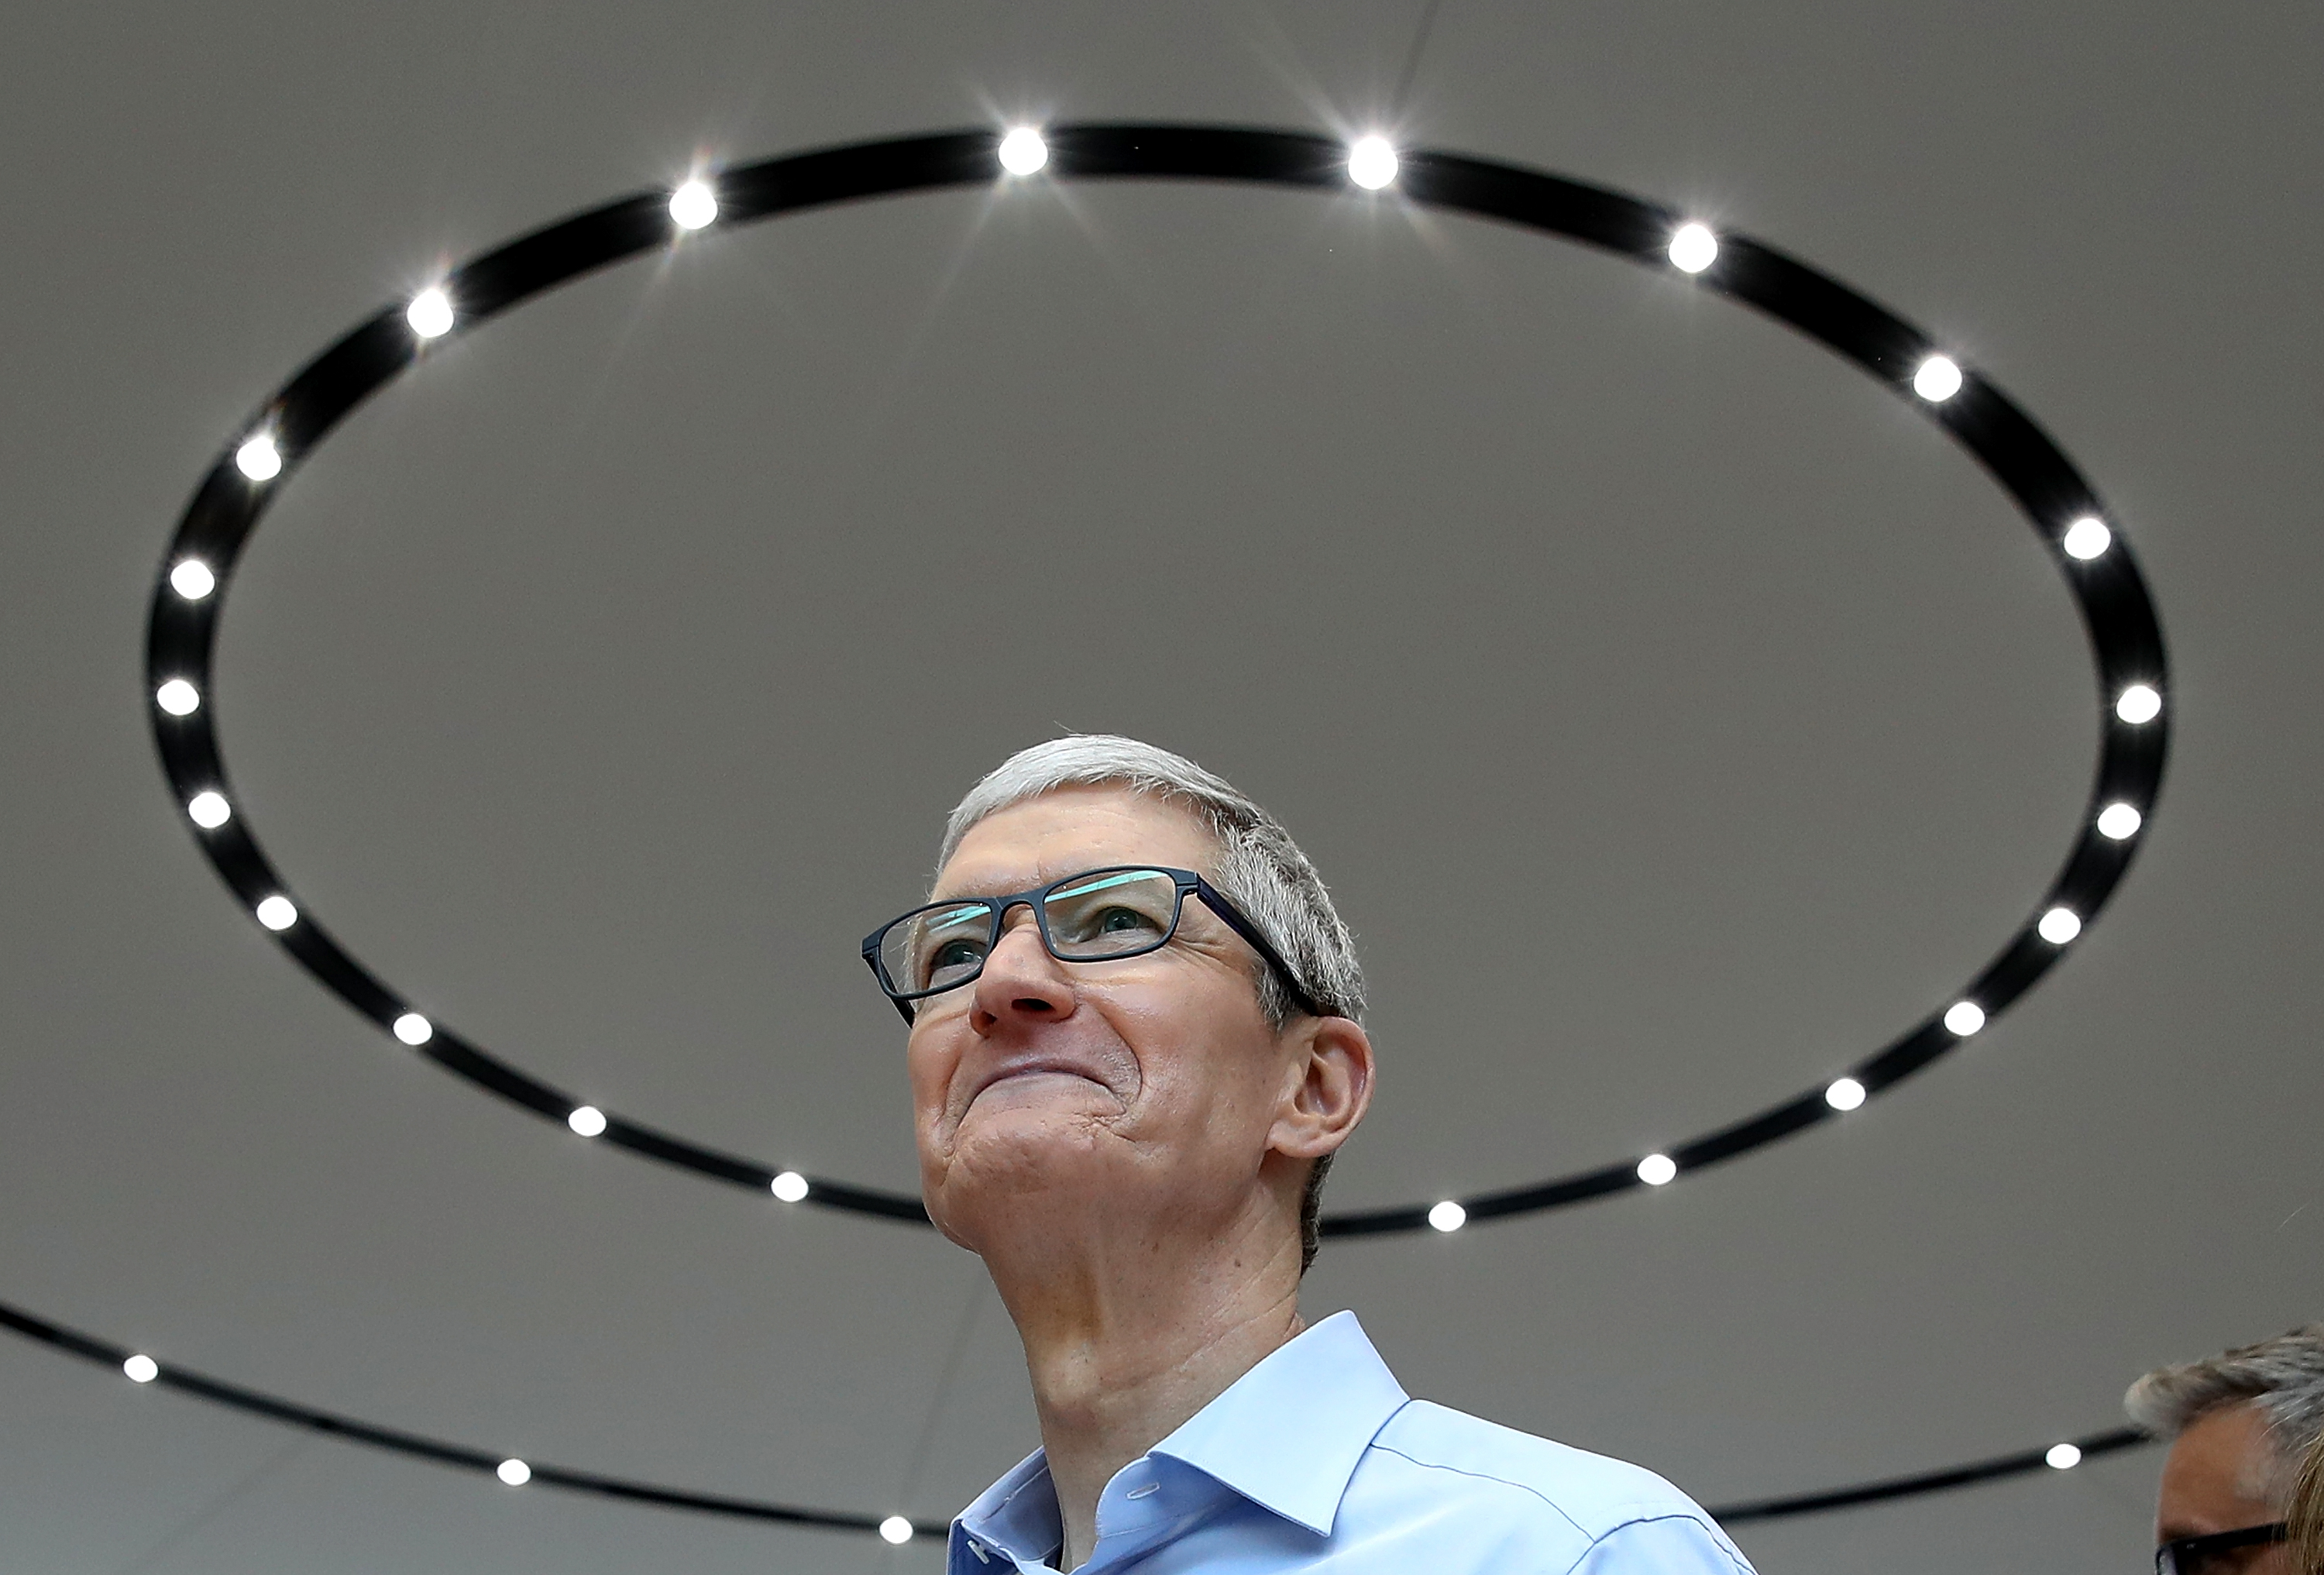 Apple CEO Tim Cook looks on during an Apple event in Cupertino, California.